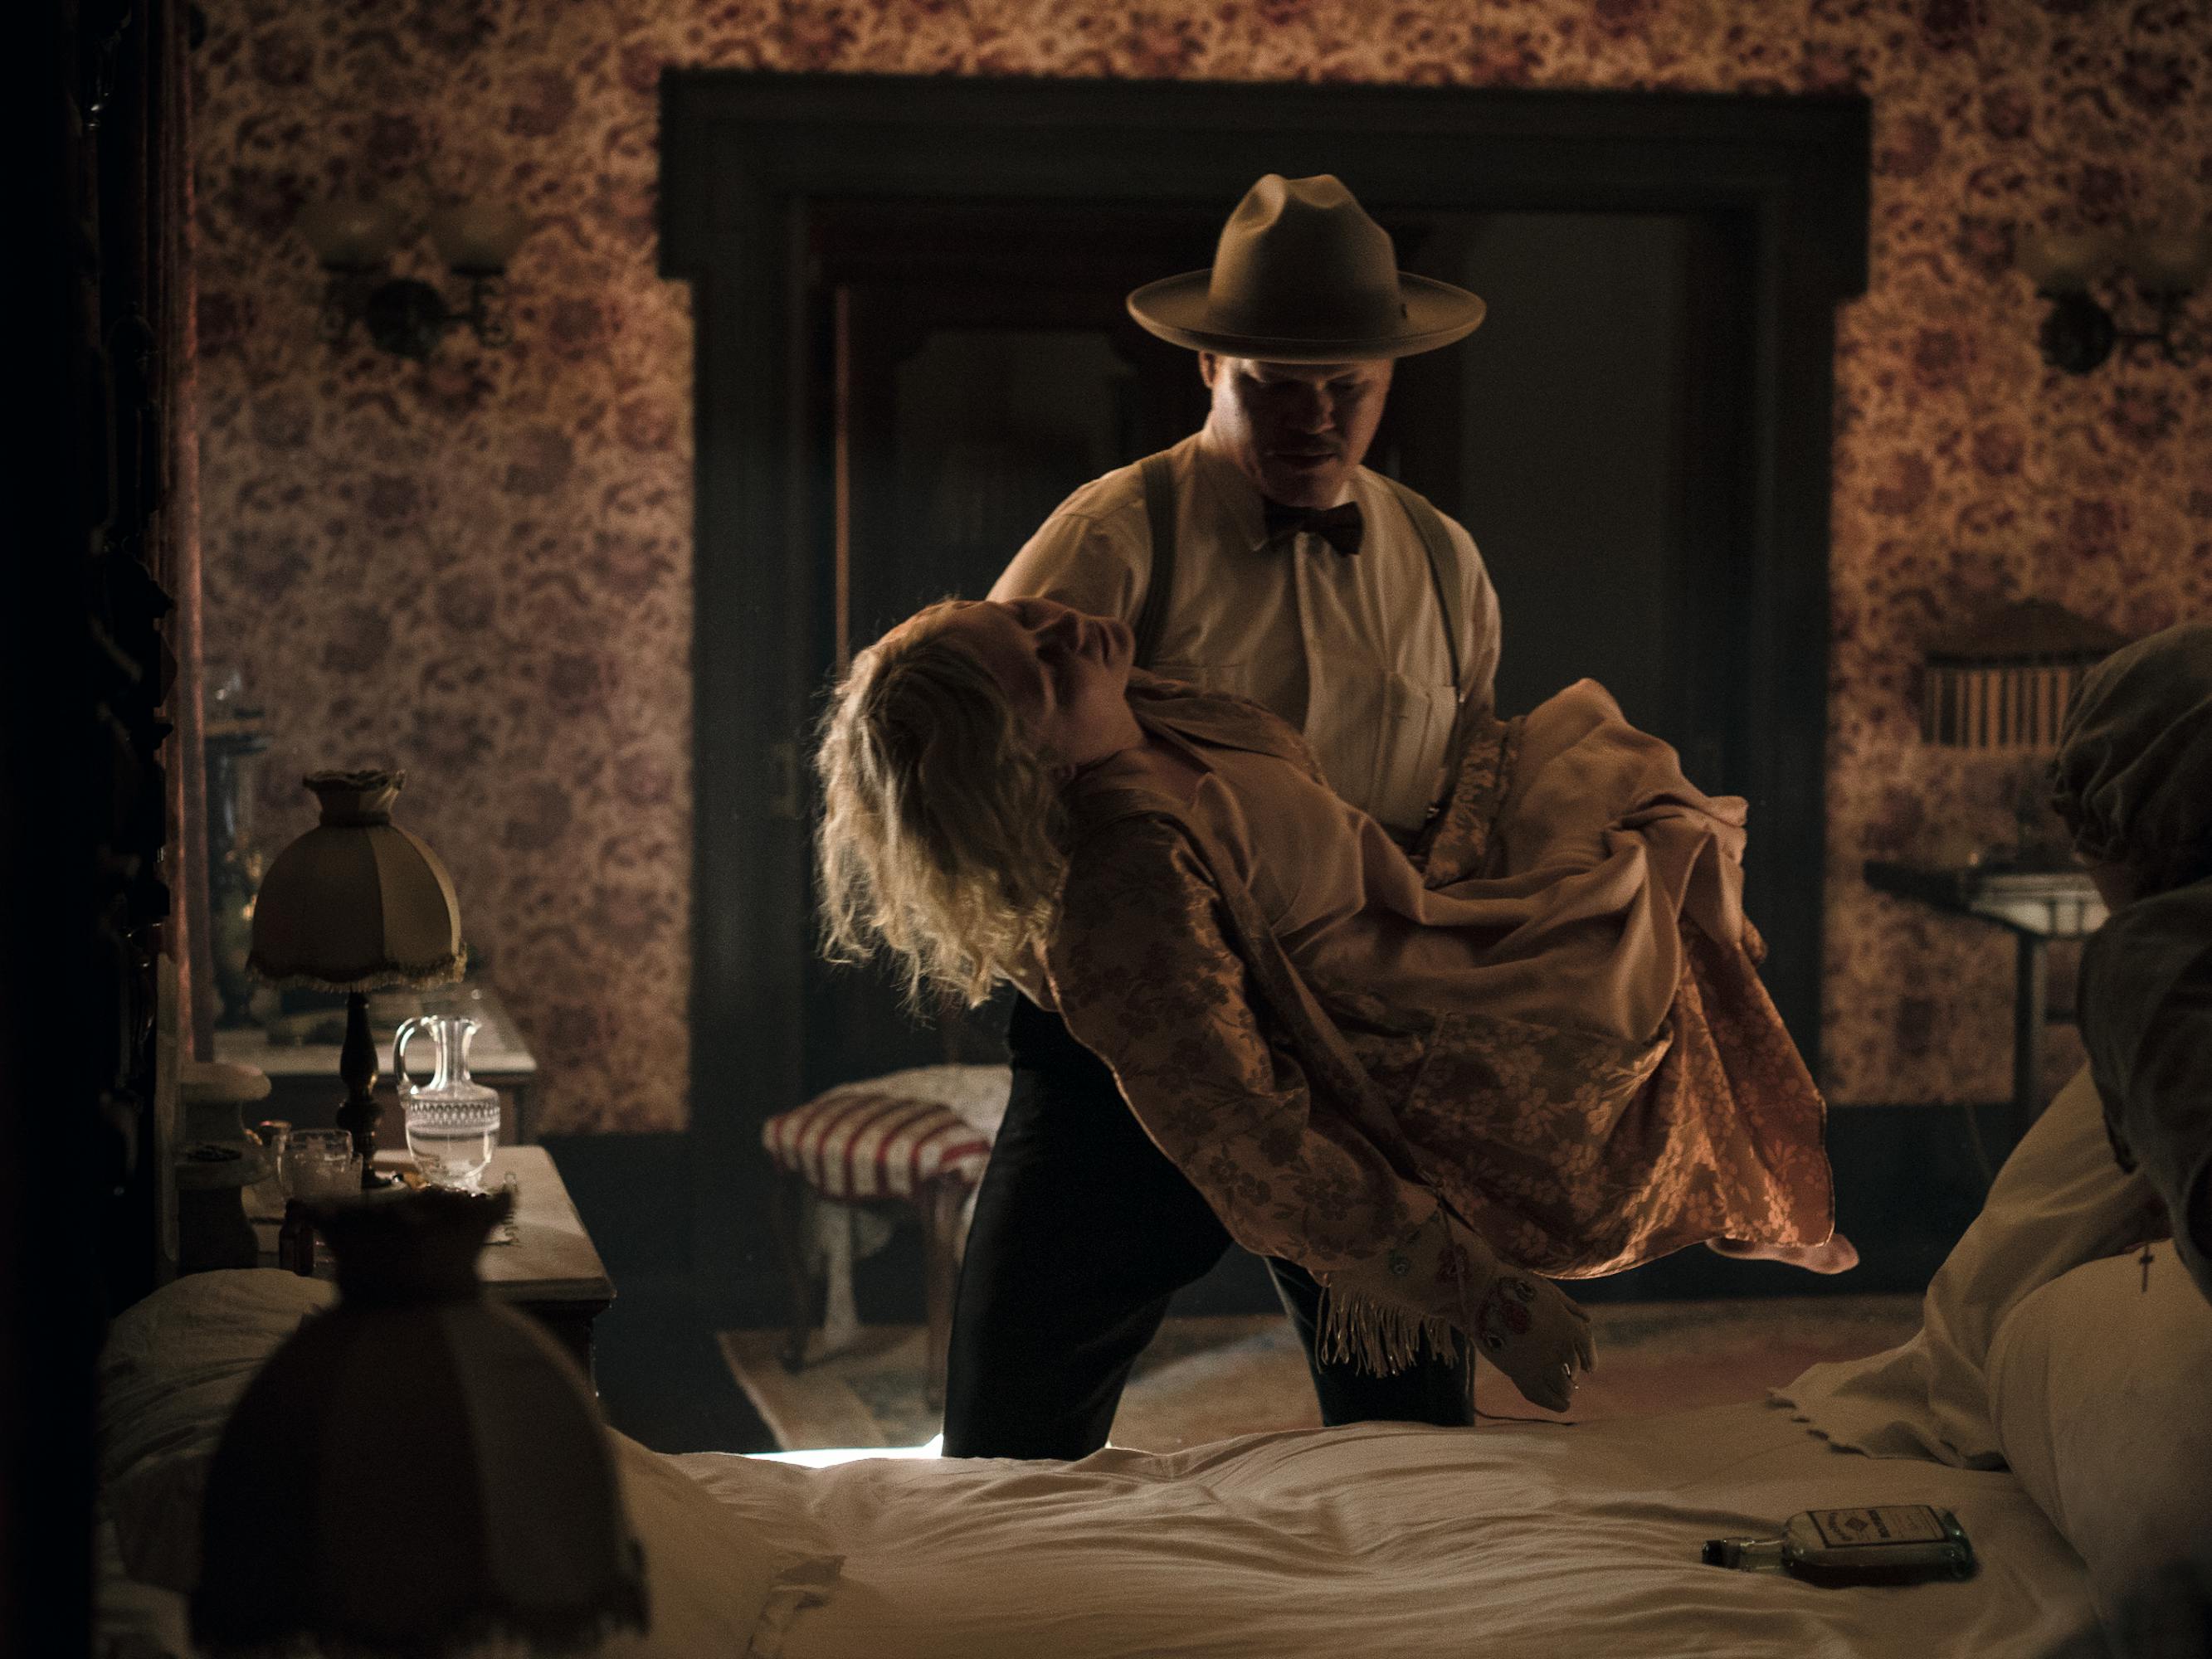 Jesse Plemons carries Kirsten Dunst's limp body to her bed. He wears a white shirt, black bowtie and wide-brimmed hat. Dunst wears a pink dress.